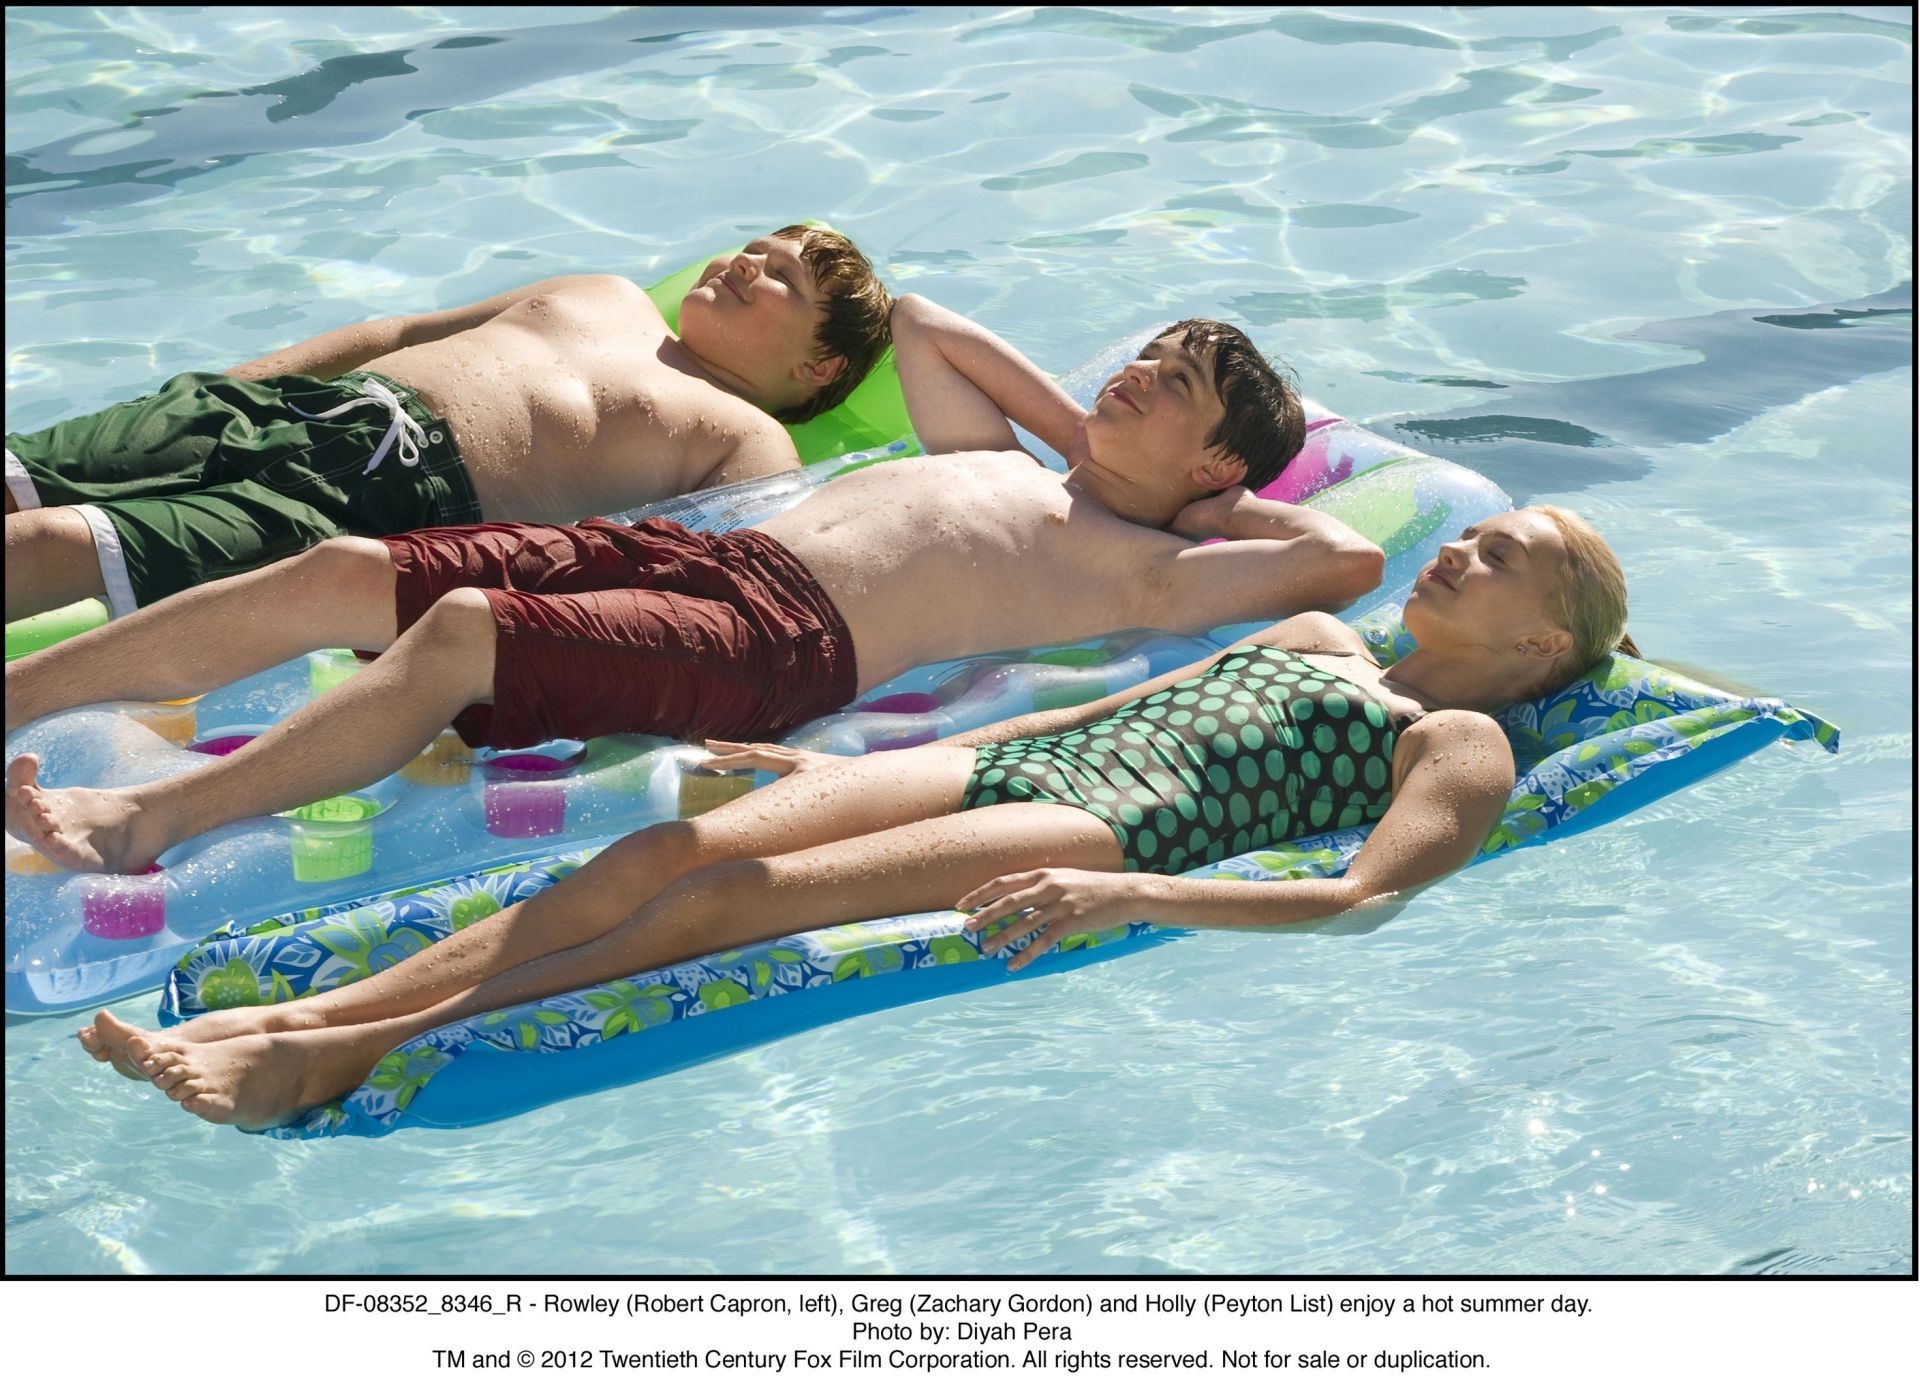 Robert Capron, Zachary Gordon and Peyton List in The 20th Century Fox's Diary of a Wimpy Kid: Dog Days (2012). Photo credit by Diyah Pera.